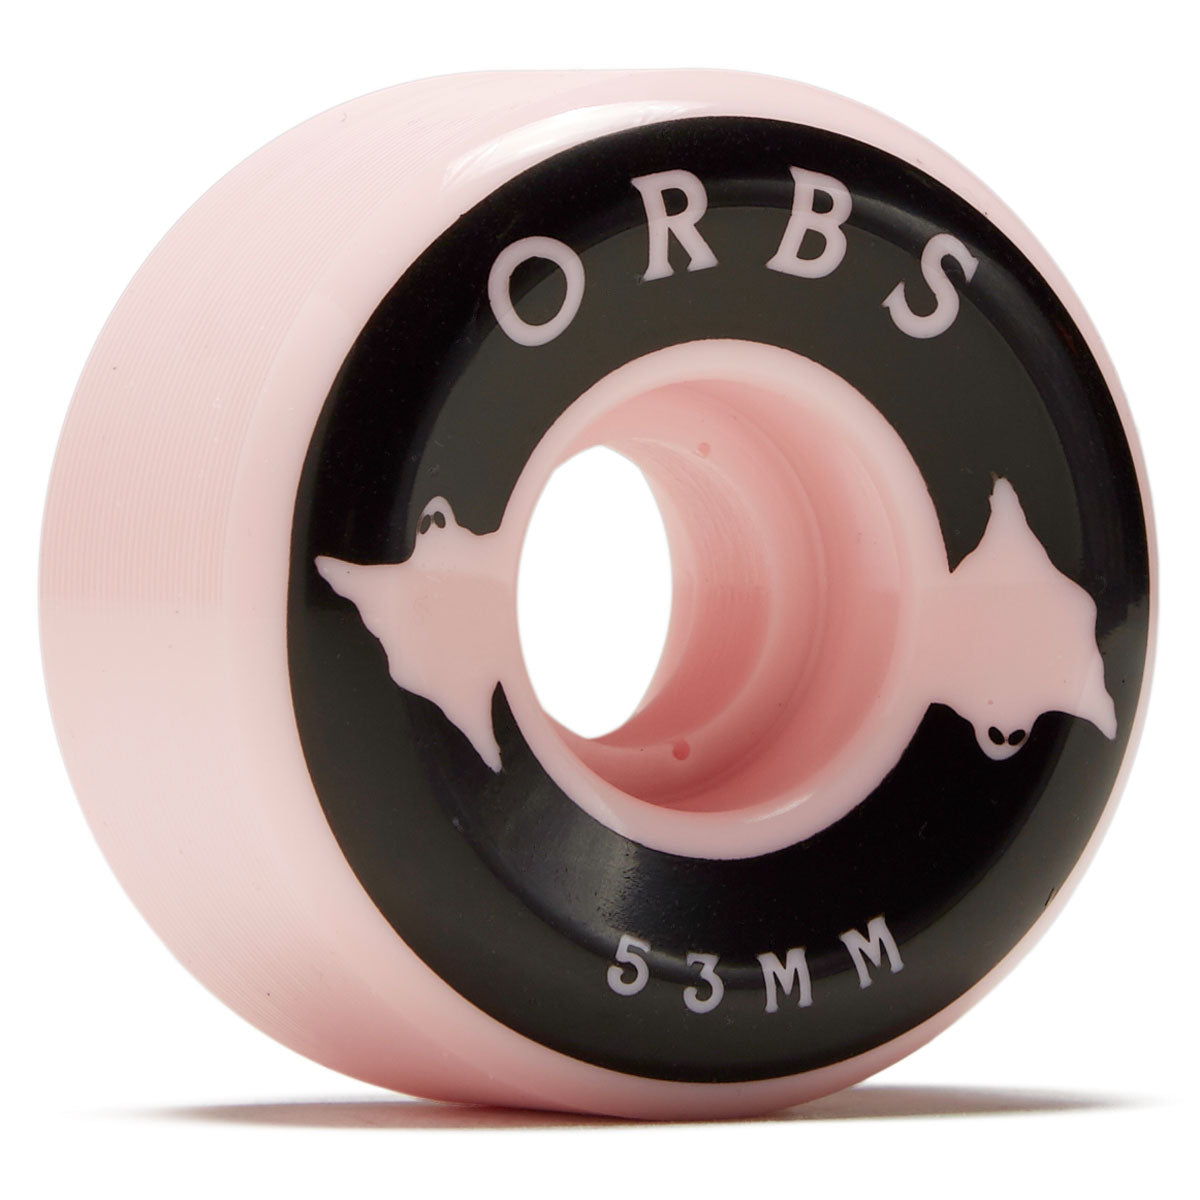 Welcome Orbs Specters Conical 99A Skateboard Wheels - Light Pink - 53mm image 1